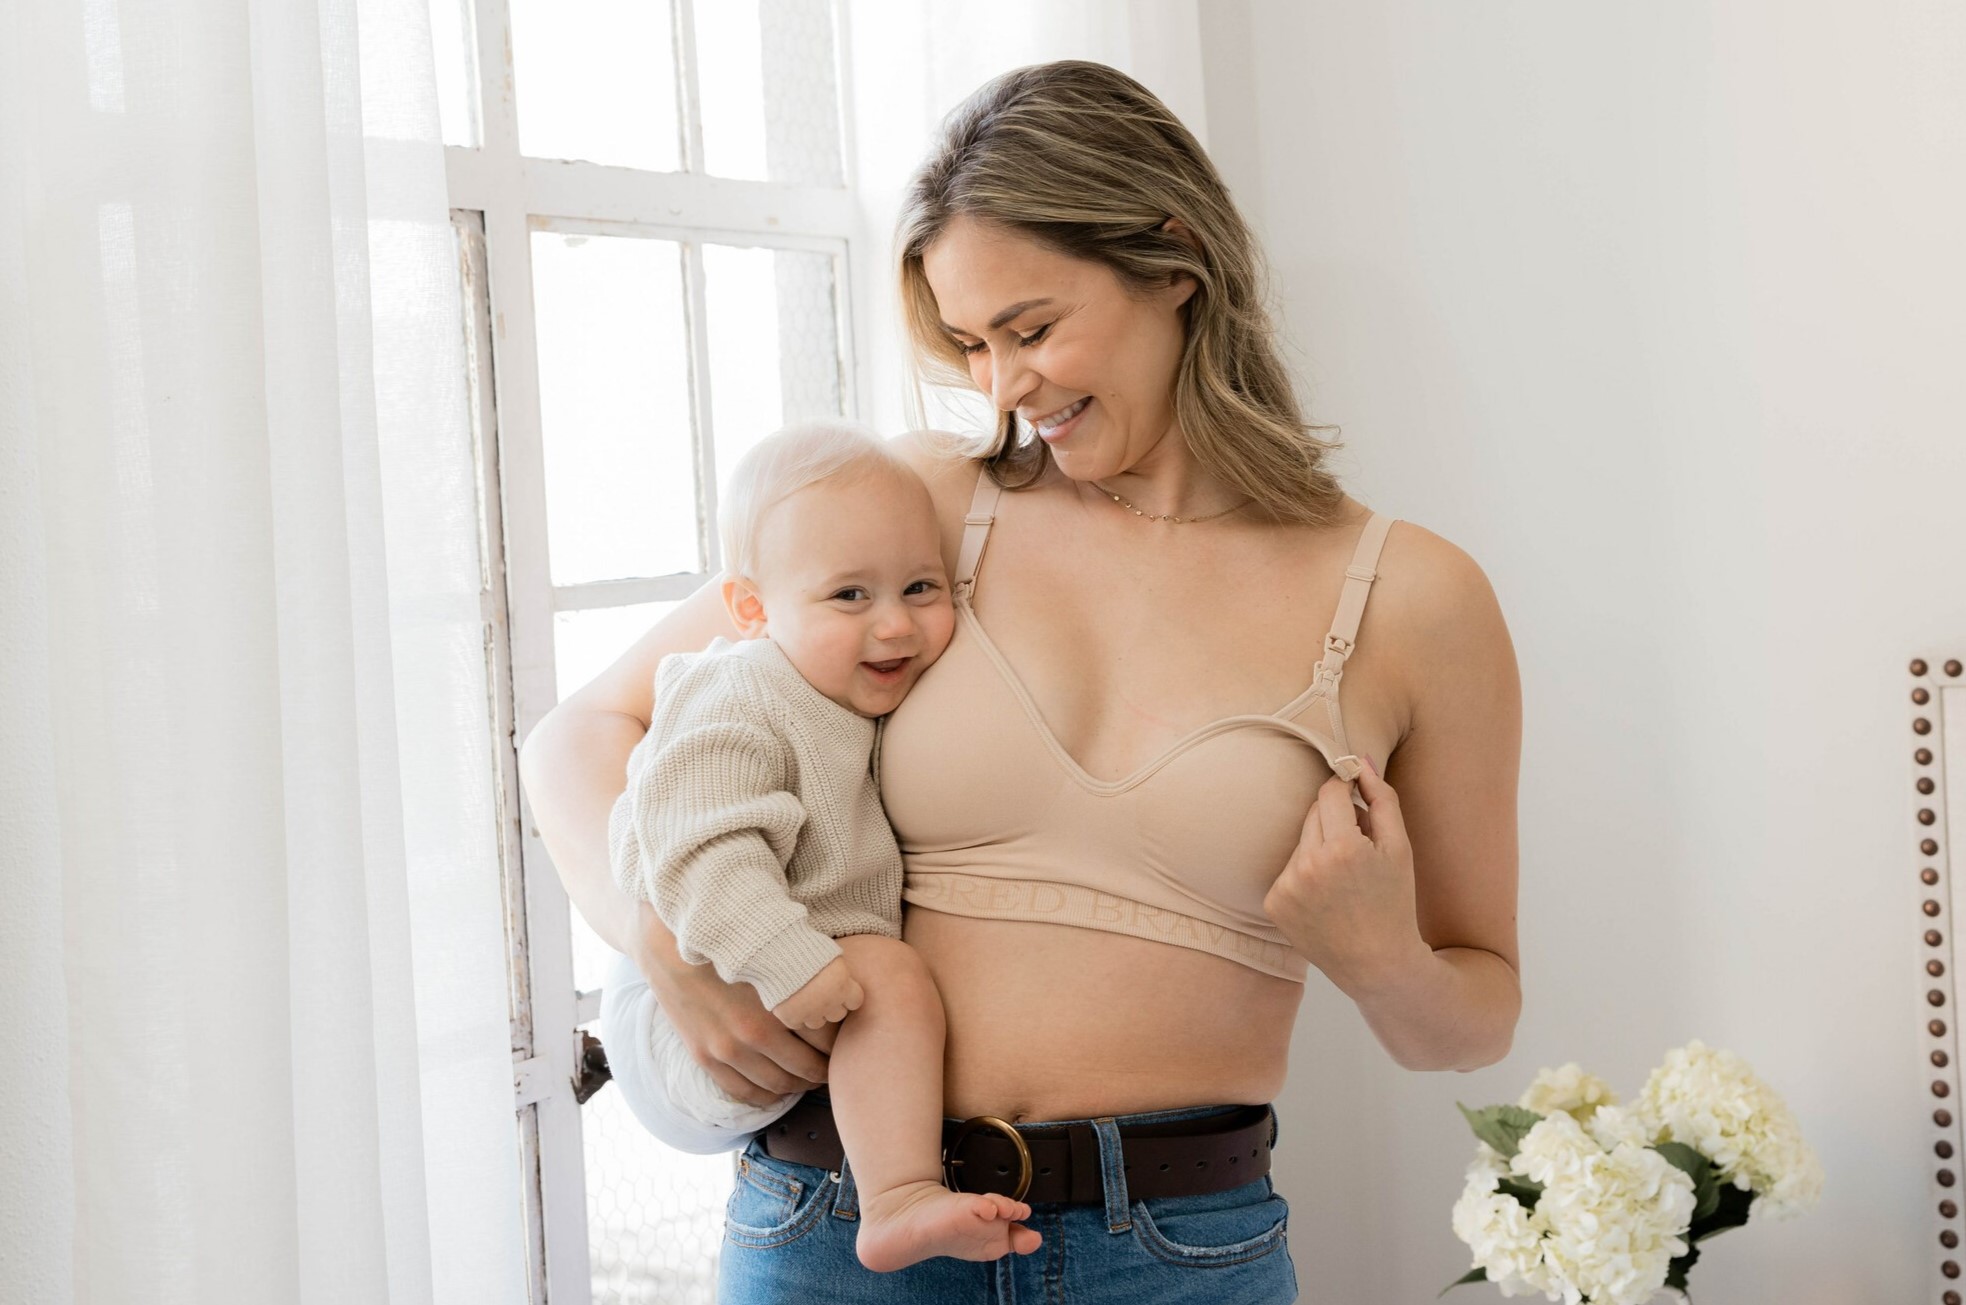 Maternity and Postpartum Essentials with Kindred Bravely and